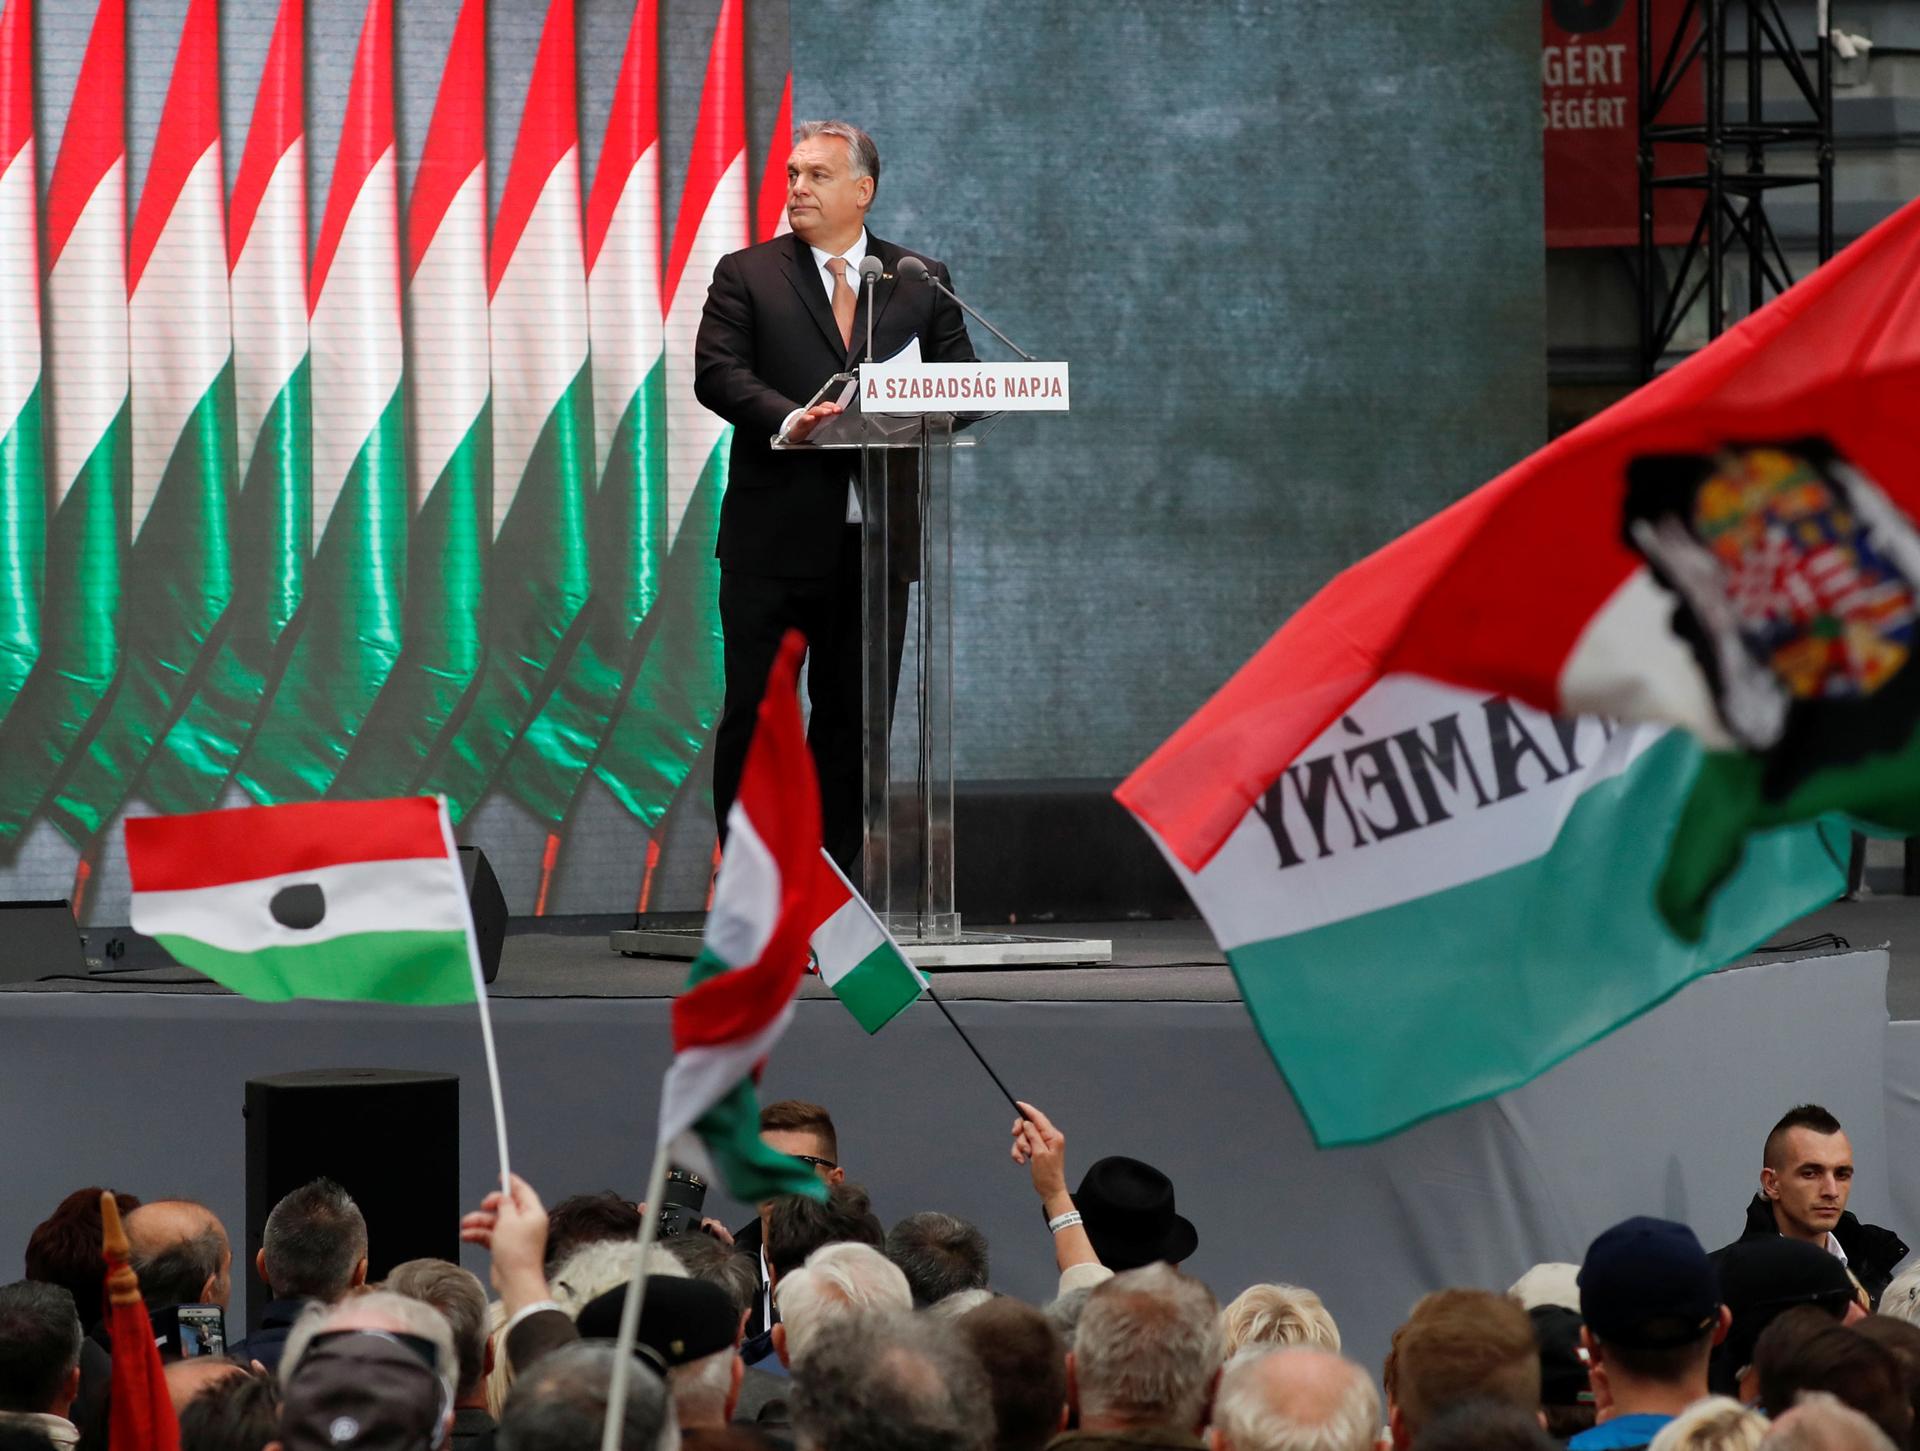 Hungarian Prime Minister Viktor Orbán stands at a podium on a stage above a crowd of people, many of whom are holding Hungarian flags.